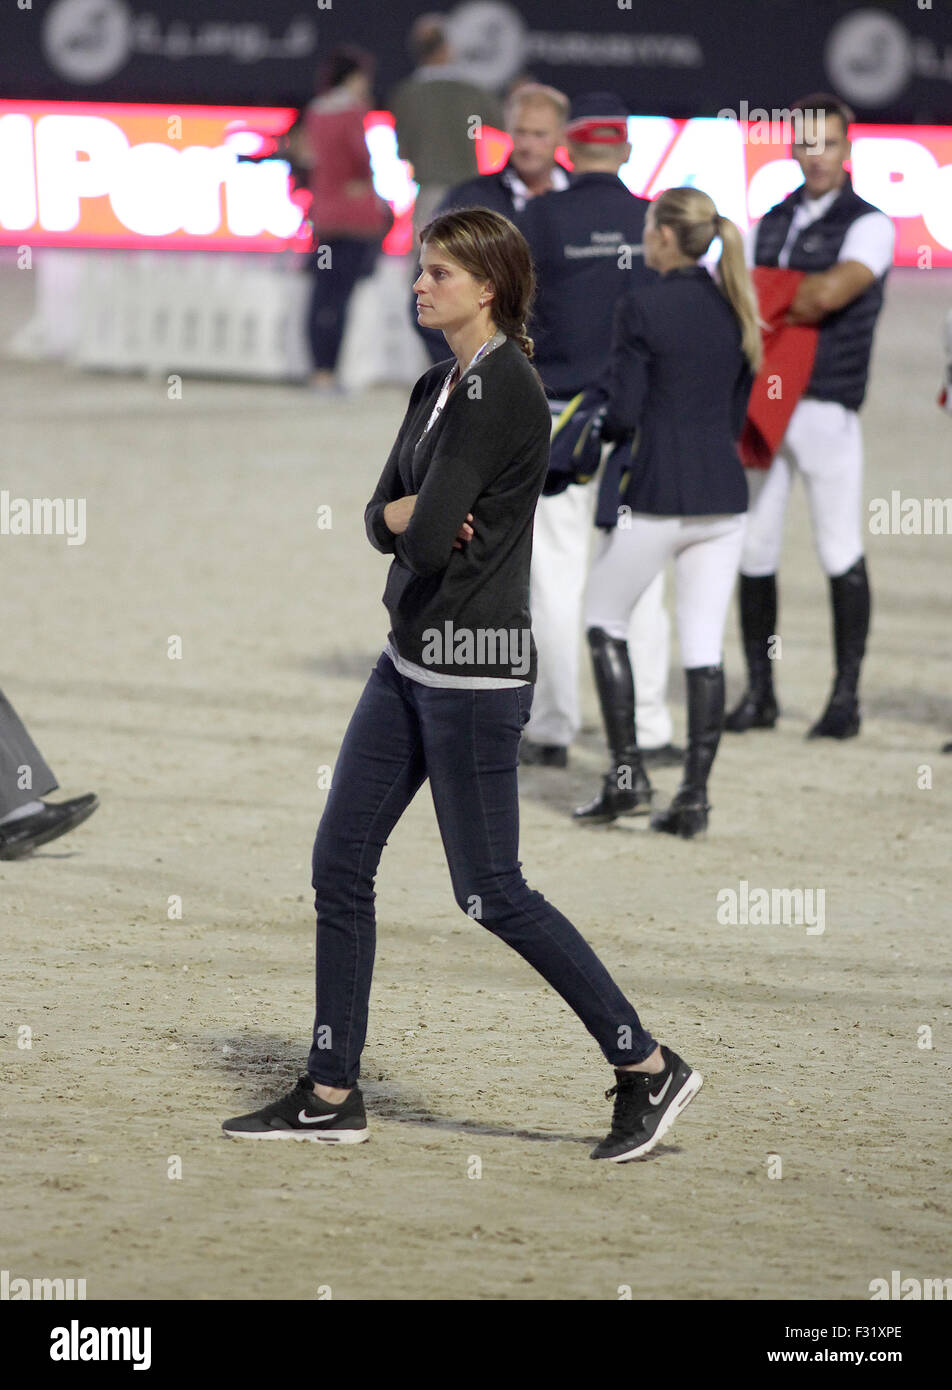 Barcelona, Spain. 25th Sep, 2015. BARCELONA, SPAIN - SEPTEMBER 25: Athina Onassis is seen during CSIO Barcelona 2015, 104th International Show Jumping on September 25, 2015 in Barcelona, Spain. Photo by Elkin Cabarcas/picture alliance © dpa/Alamy Live News Stock Photo